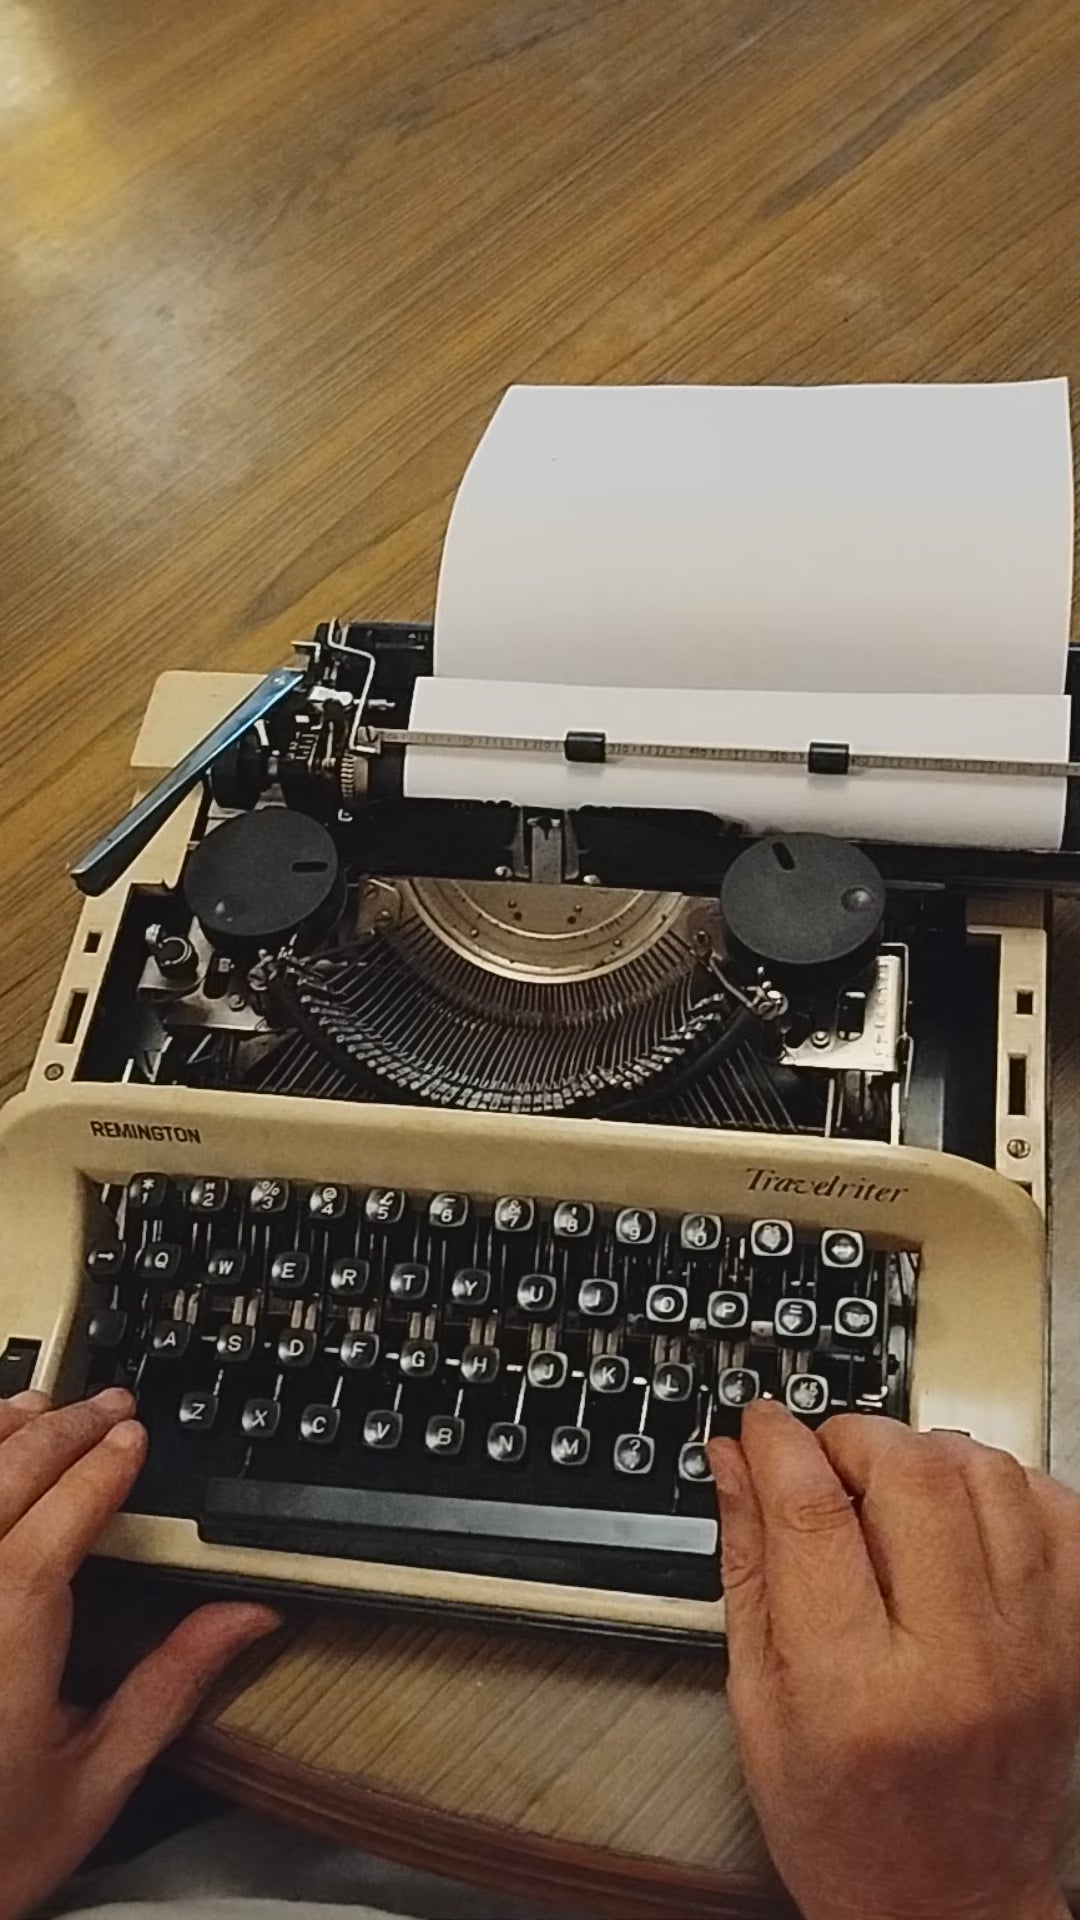 Typing Video of Remington Travelriter Typewriter. Available from universaltypewritercompany.in